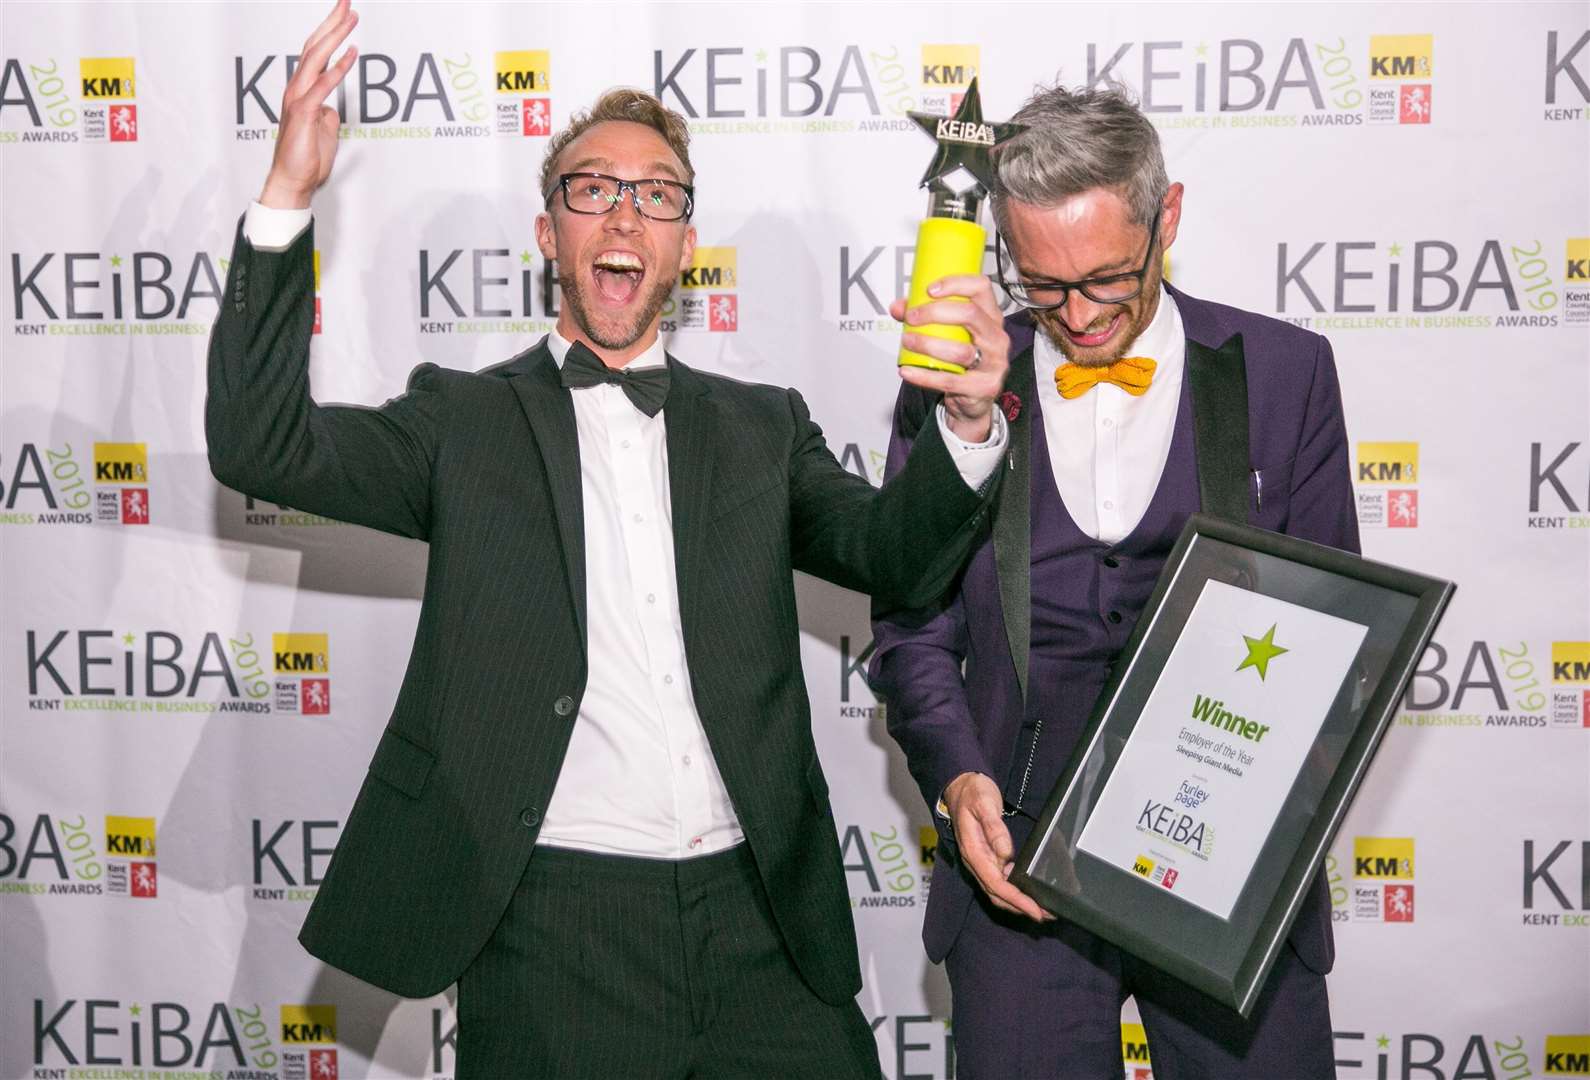 Sleeping Giant Media won three awards the last time KEiBA was staged in 2019